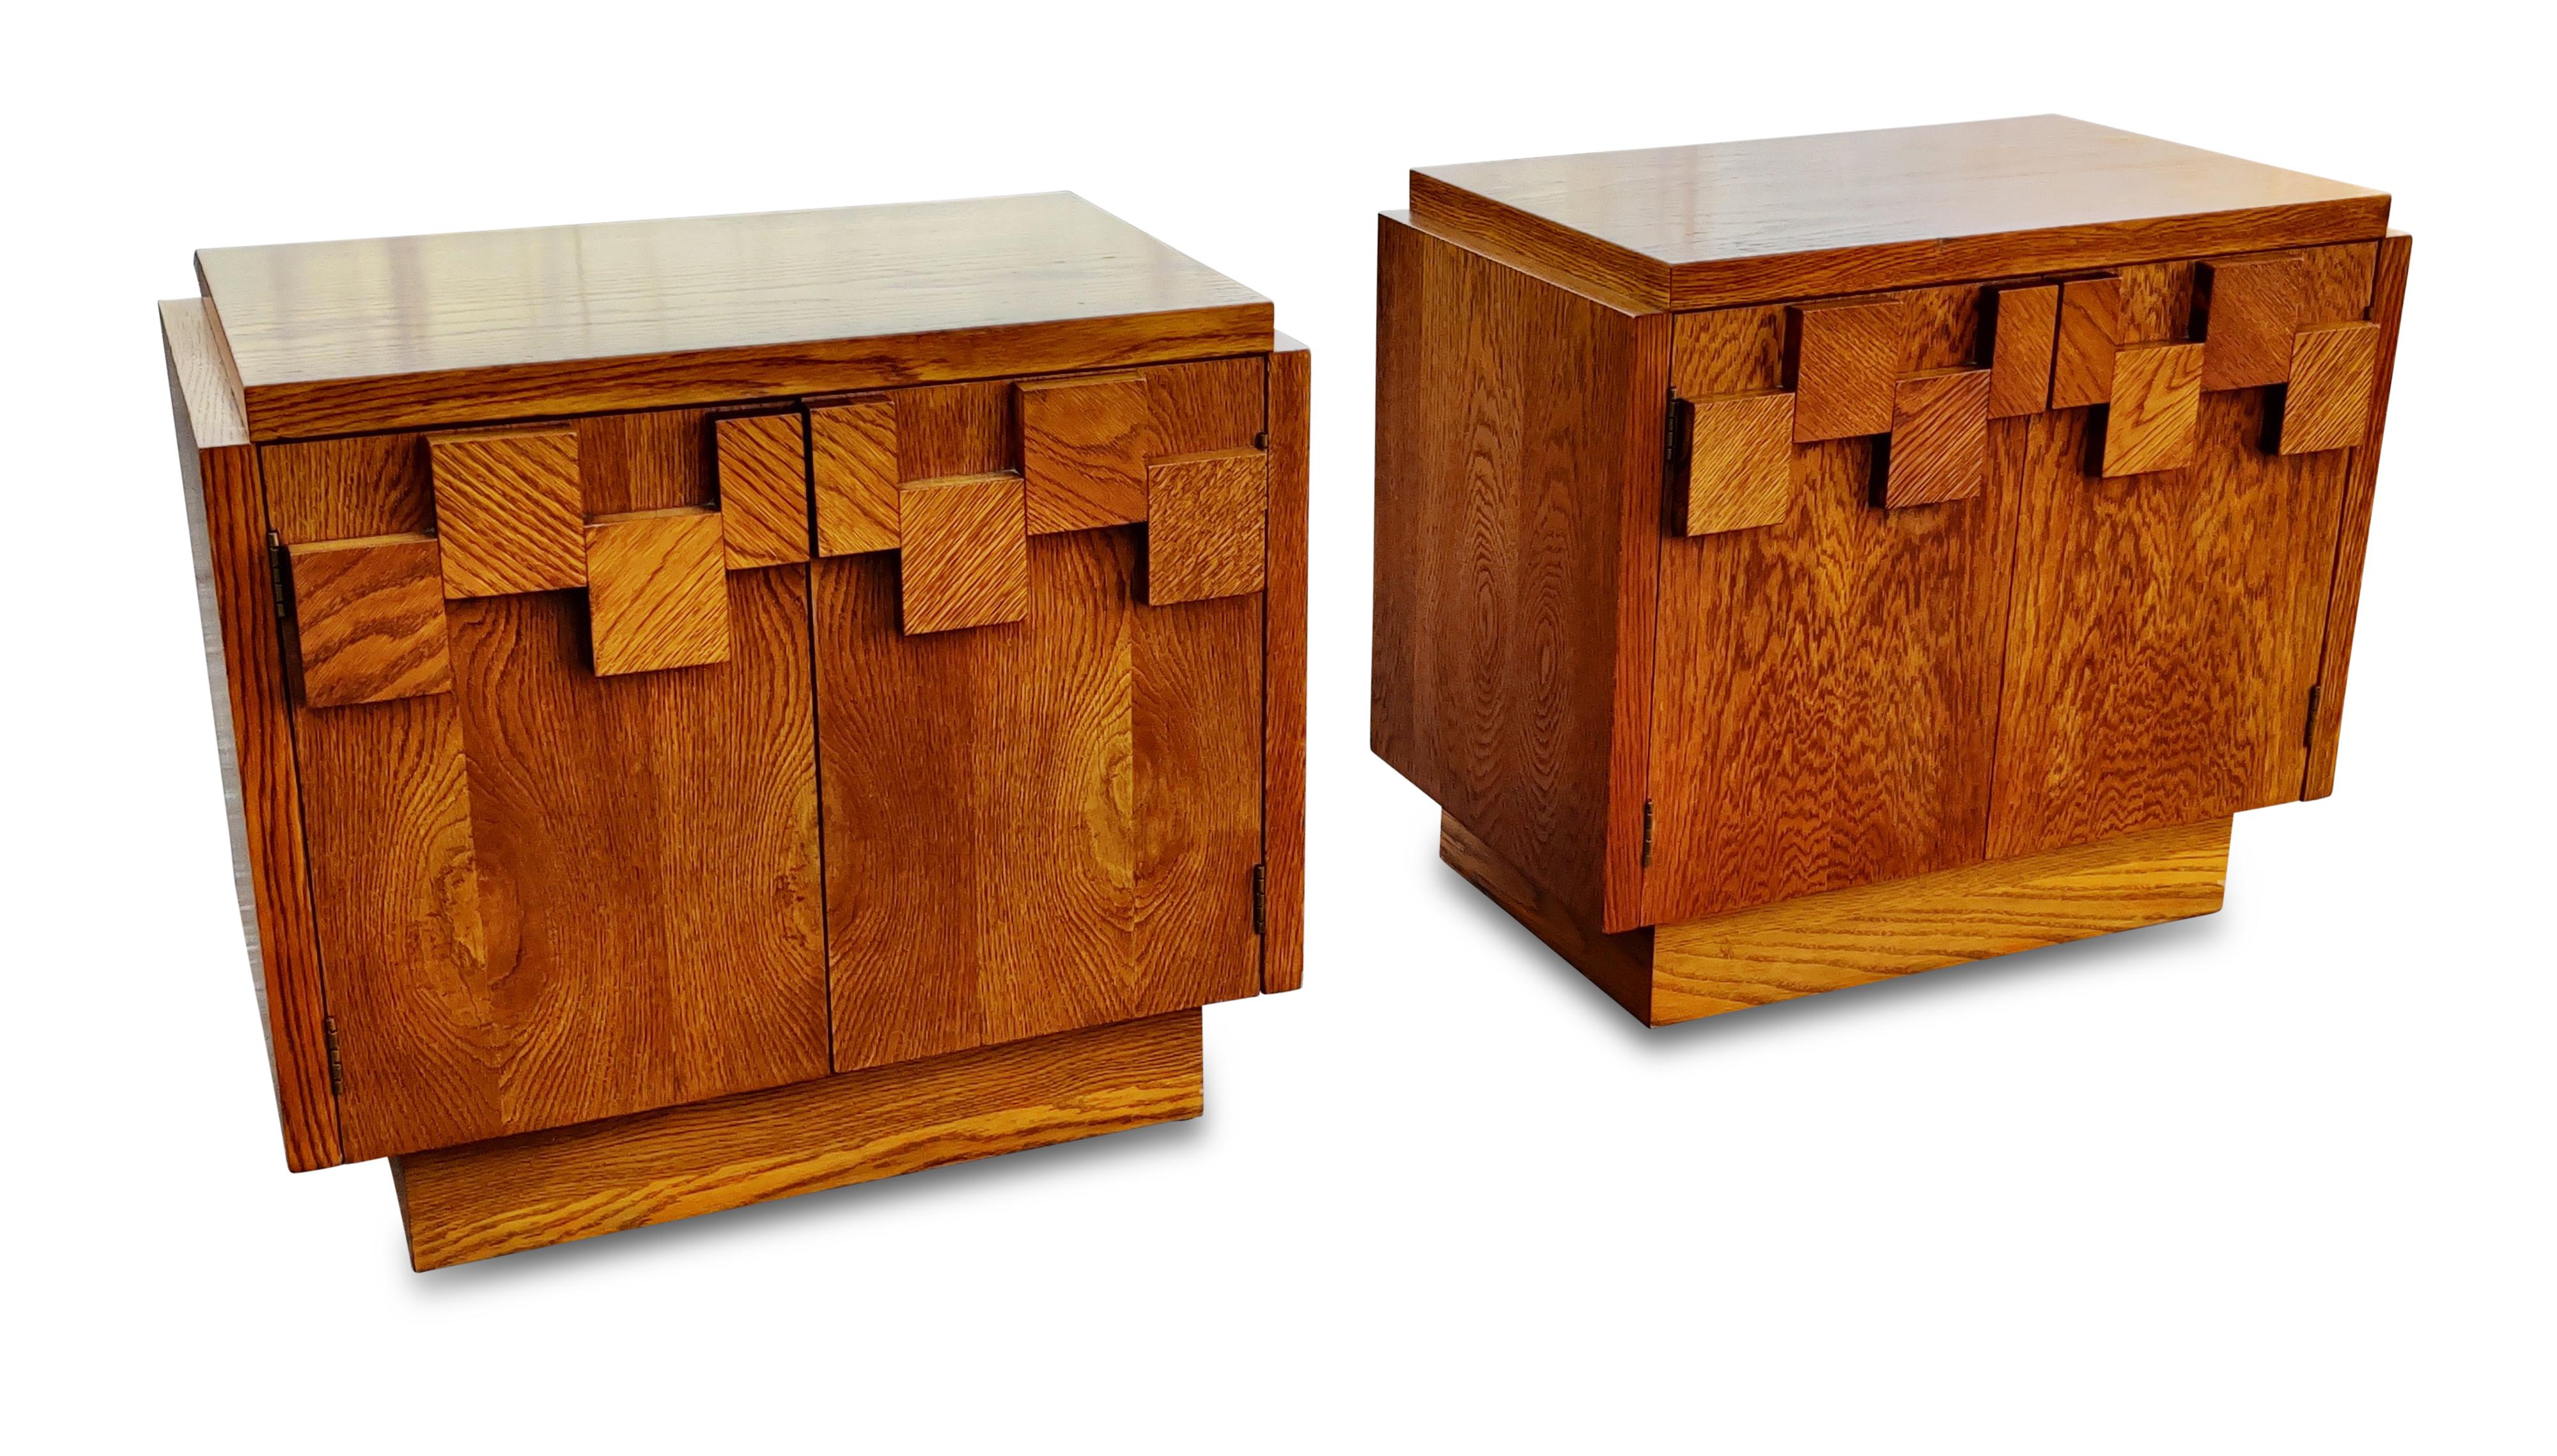 This pair of nightstands was designed in the Brutalist style made iconic by Paul Evans, and manufactured by Lane USA, circa 1970s. Made with varied blocks of oak attached to the fronts, they lend an imposing and dramatic look while retaining the